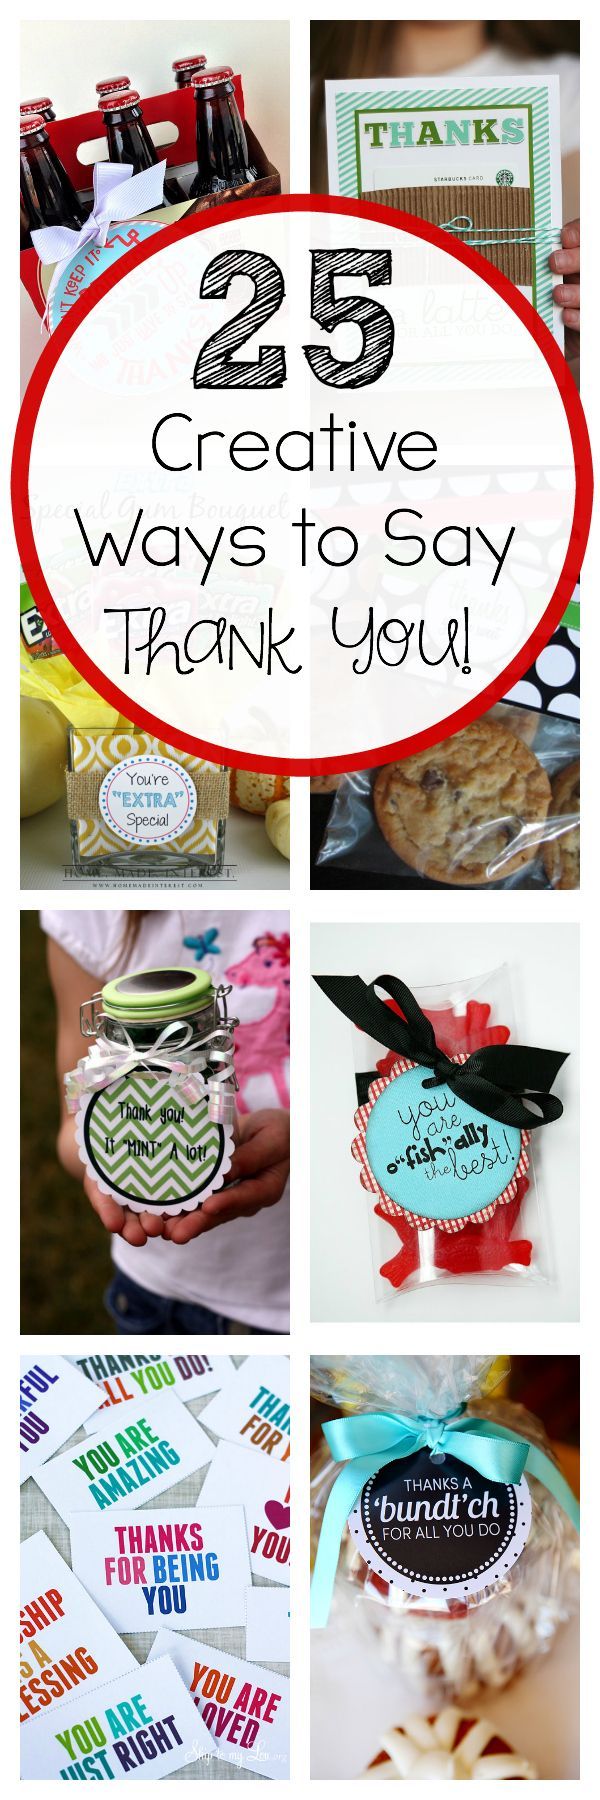 Here are 25 fun and creative ways to say thank you!